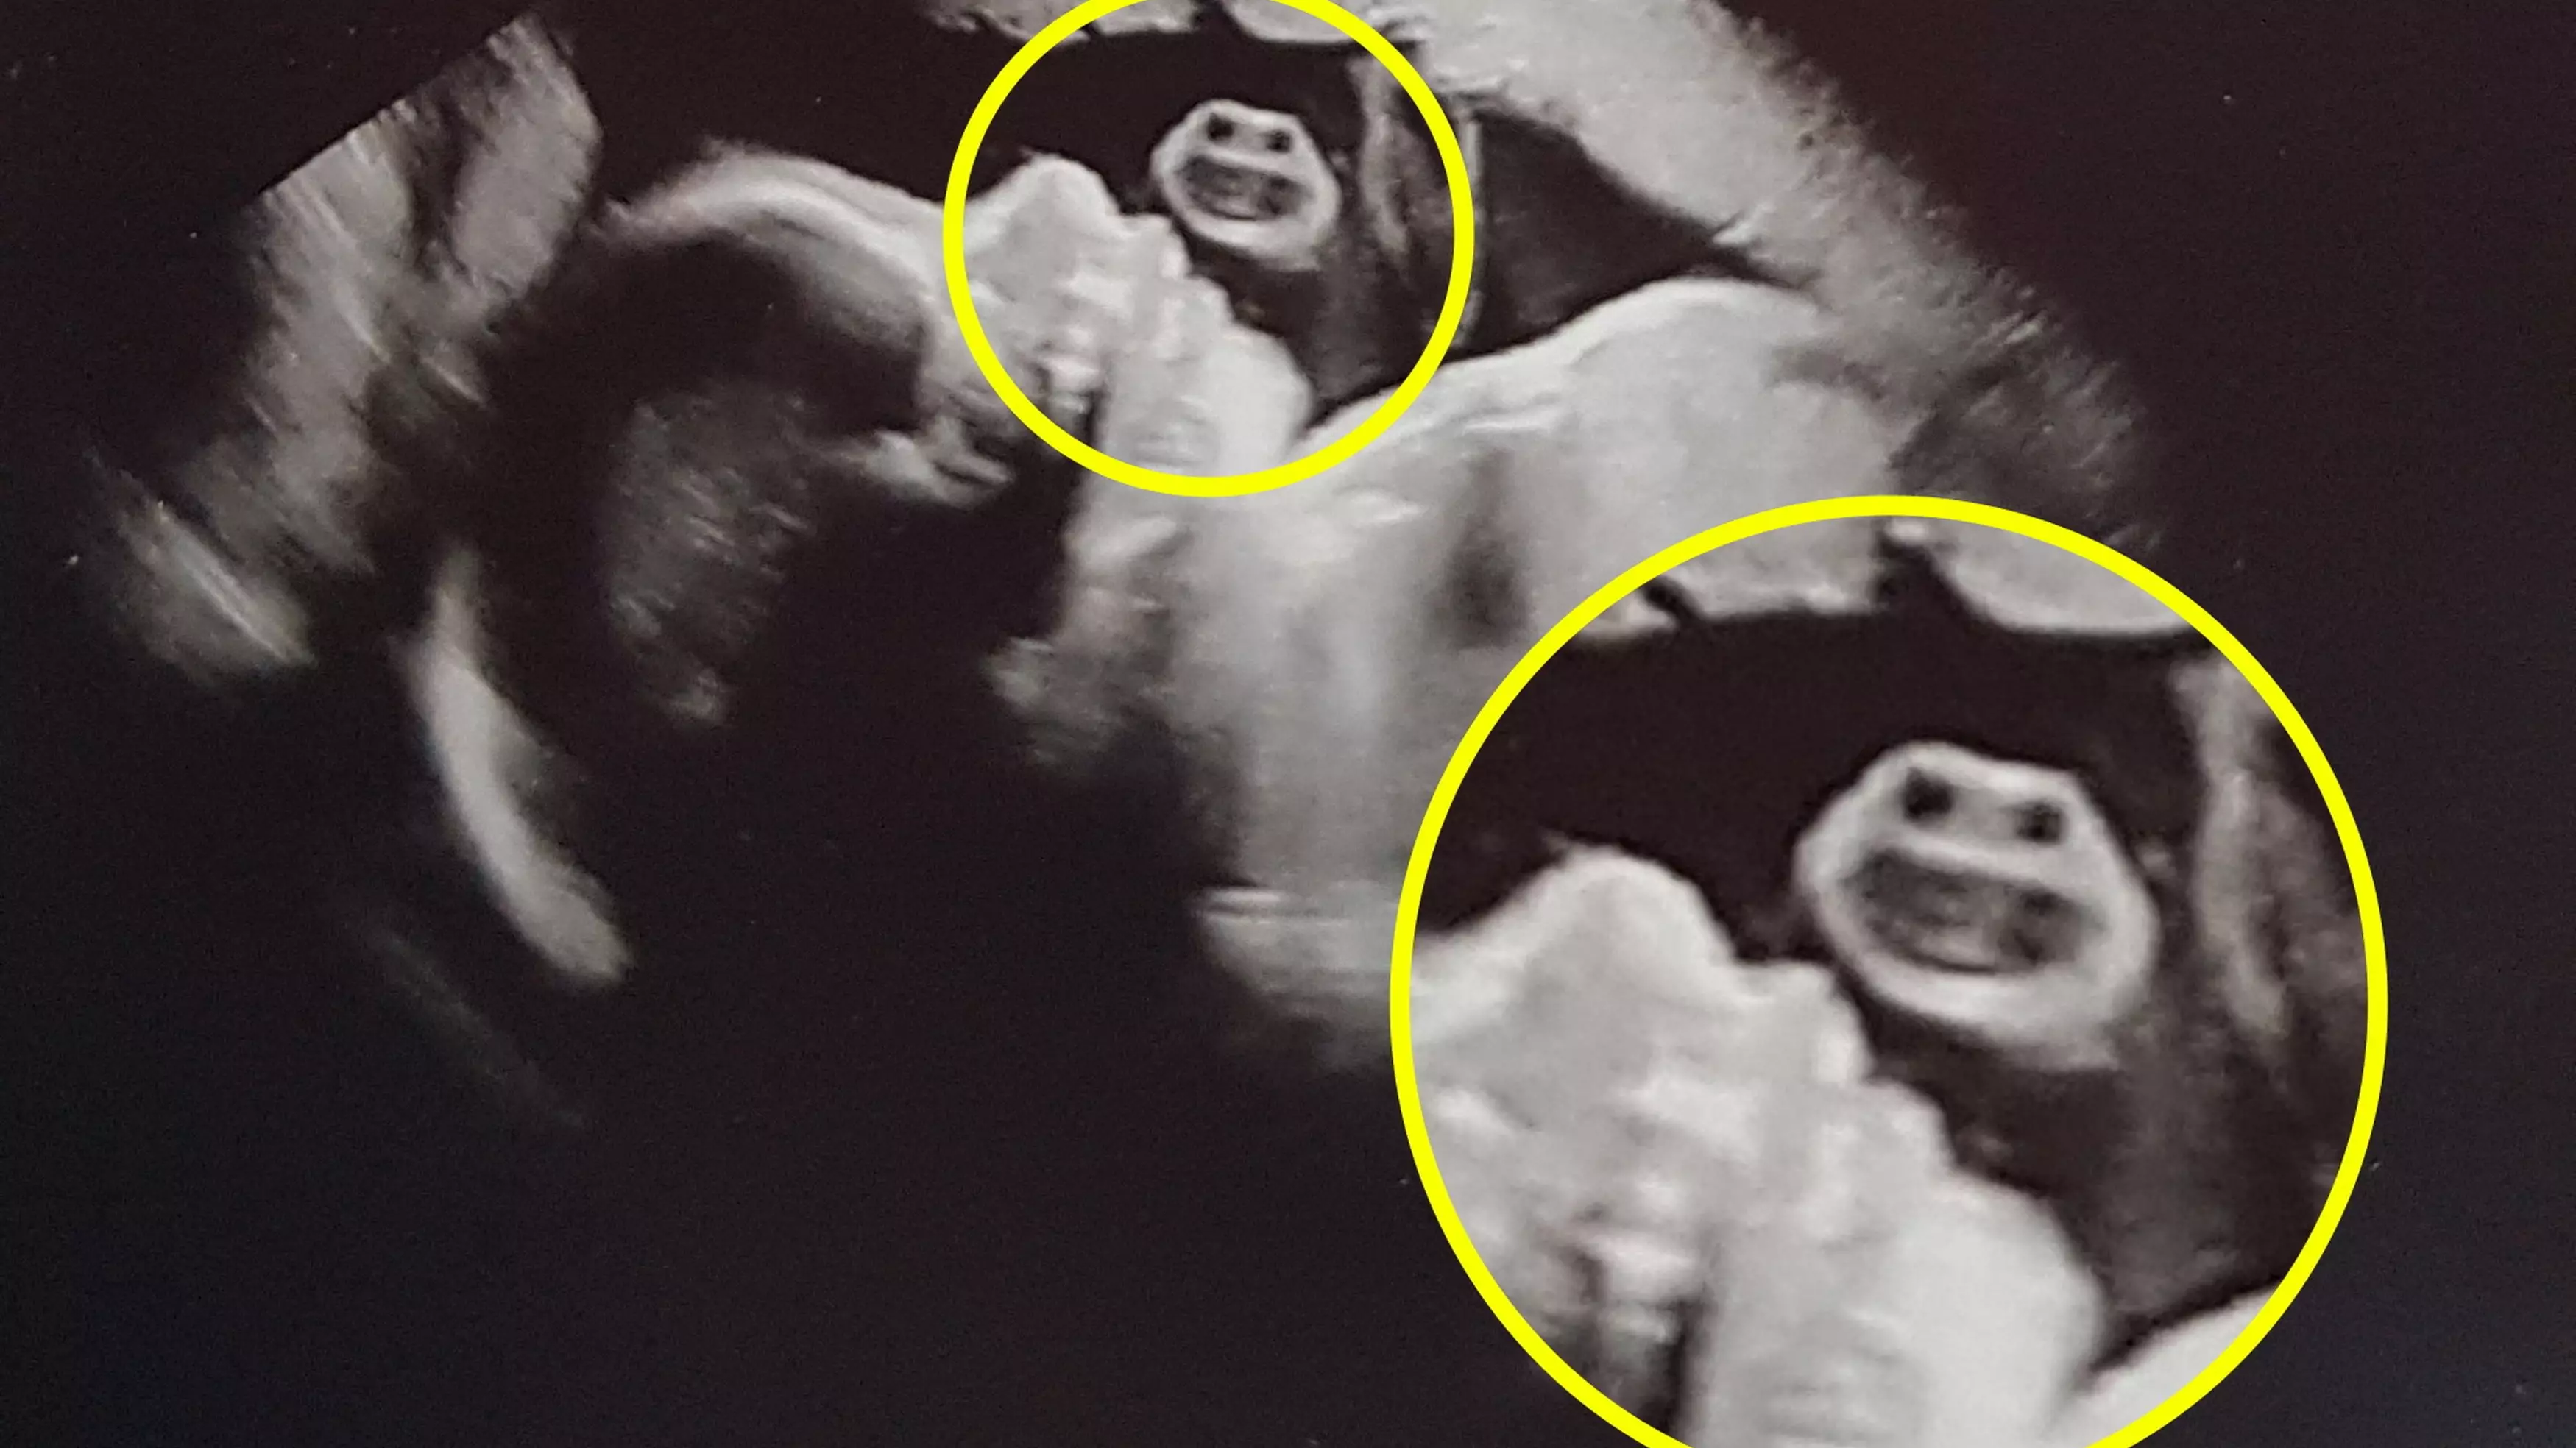 Mum Finds Sugar Puffs Cereal 'Honey Monster' Mascot In Baby Scan